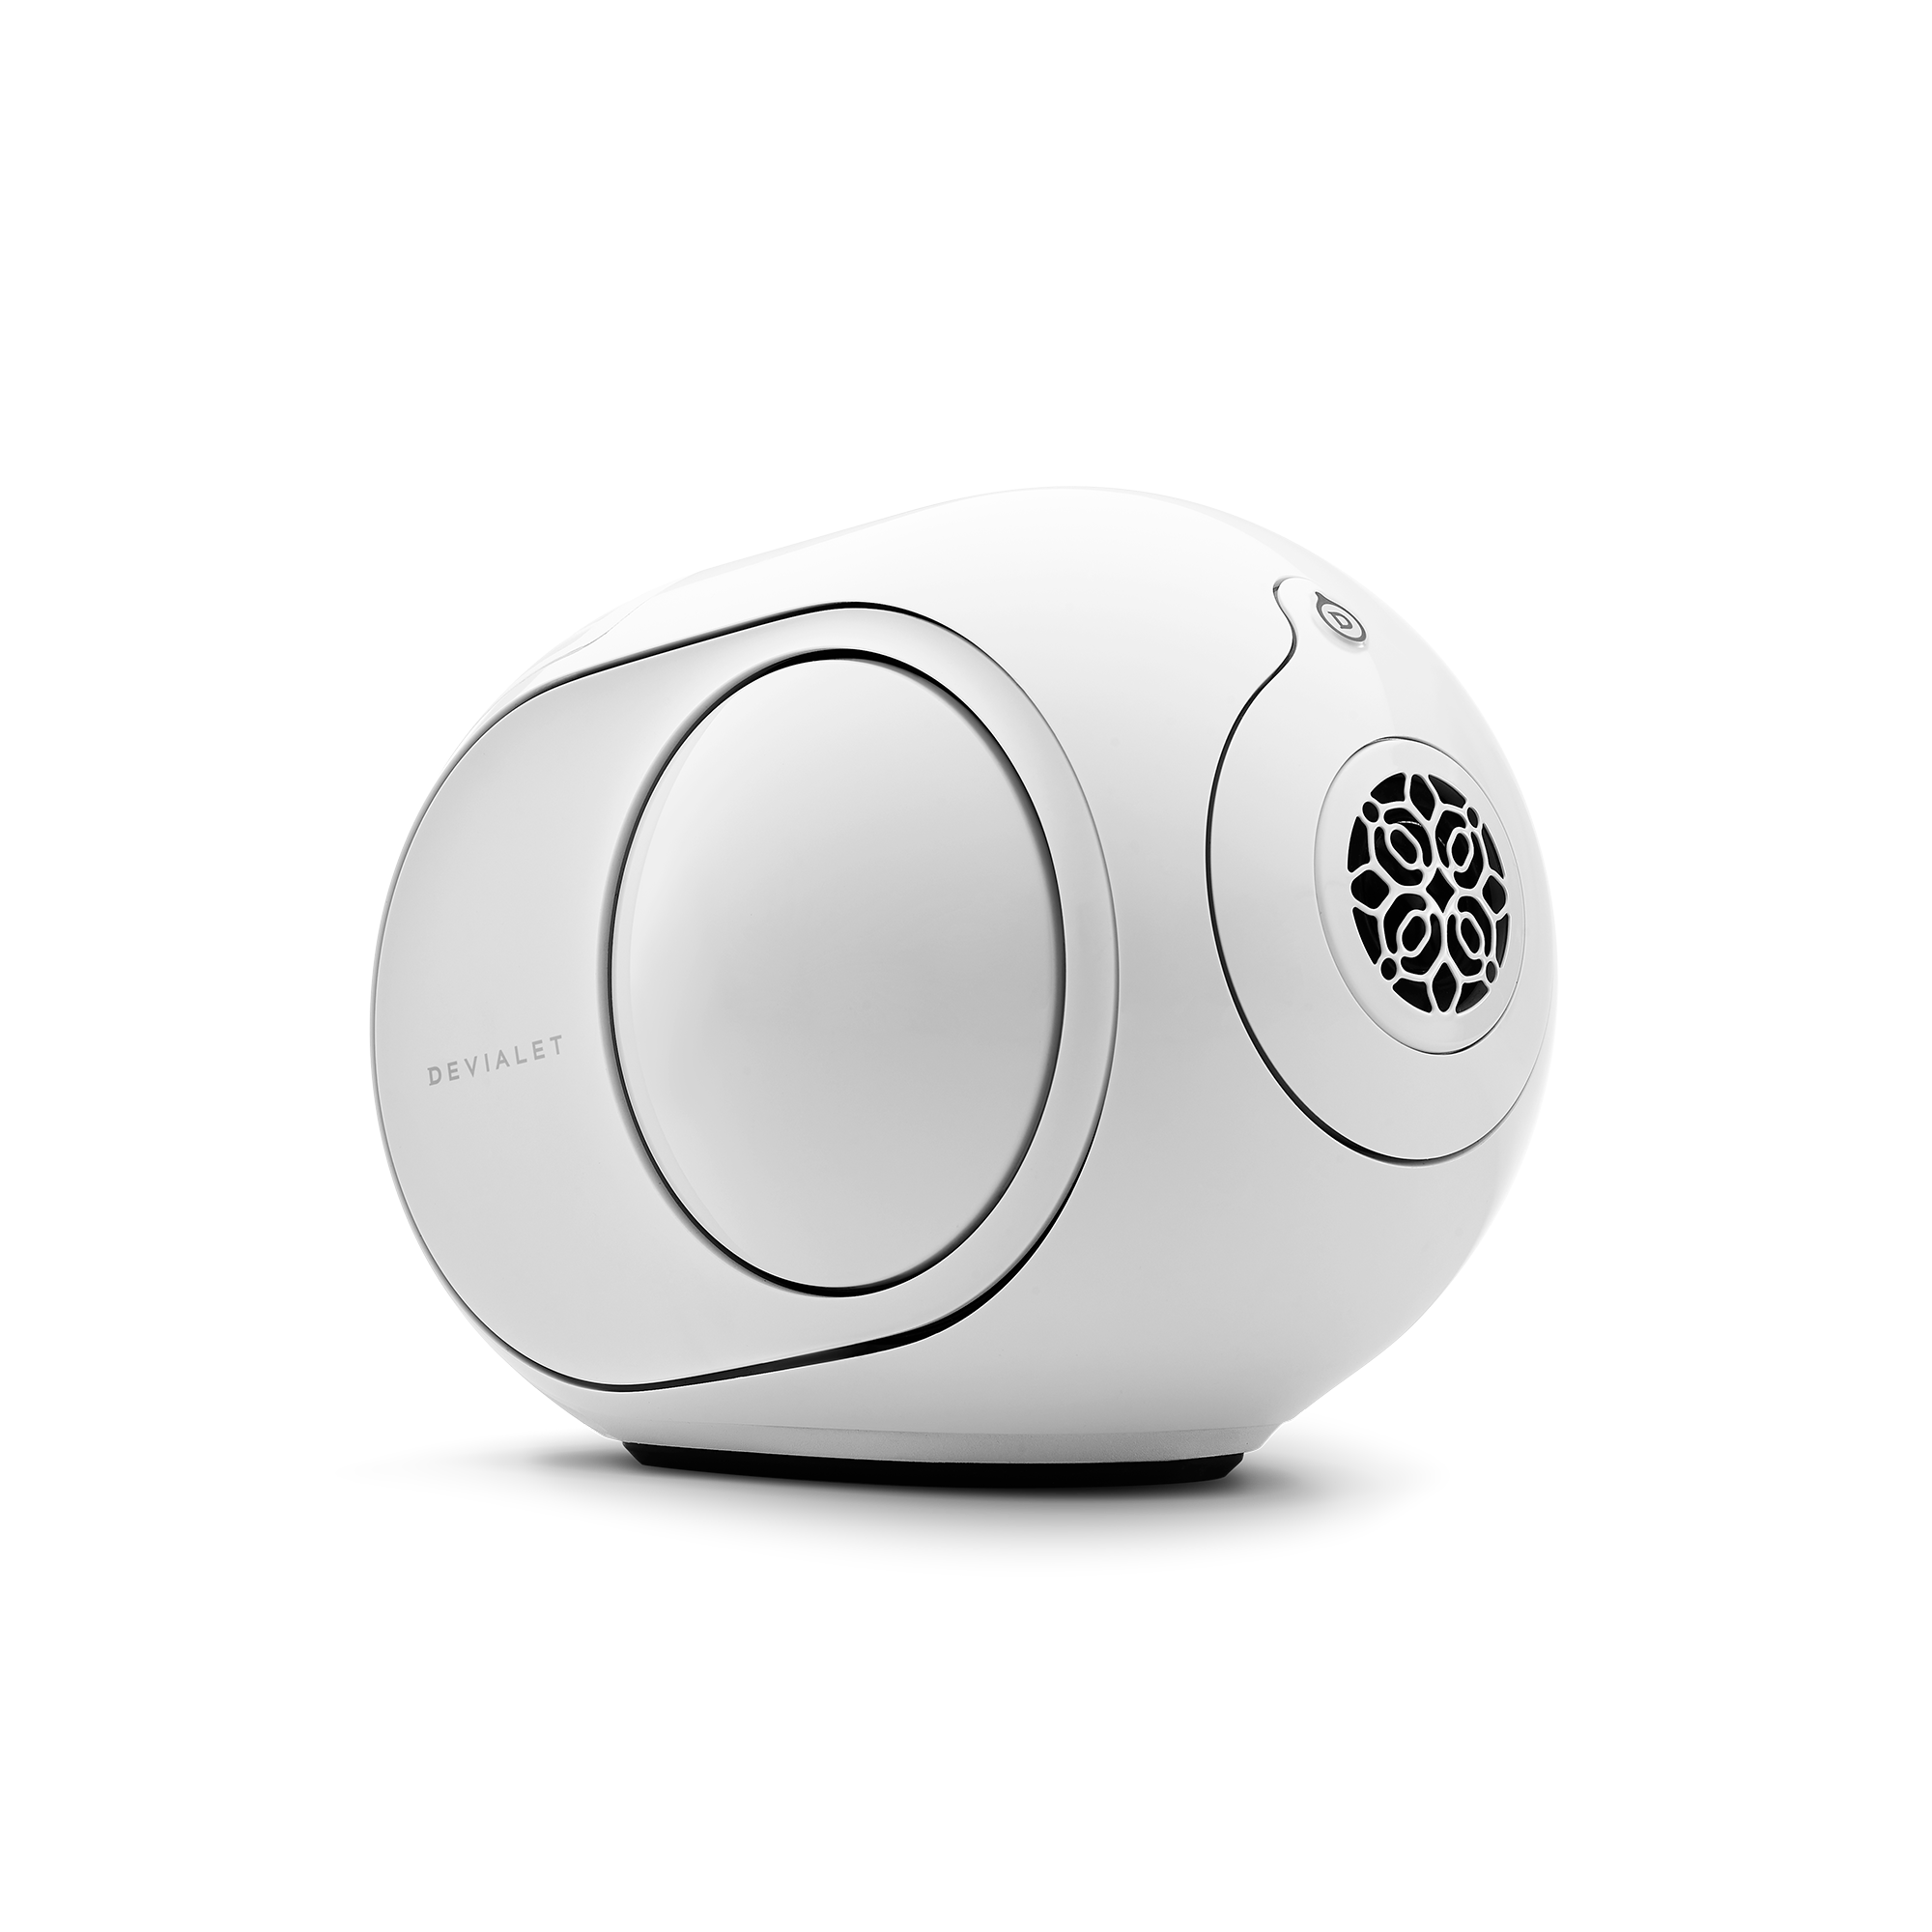 The Devialet Gemini 2 is here 